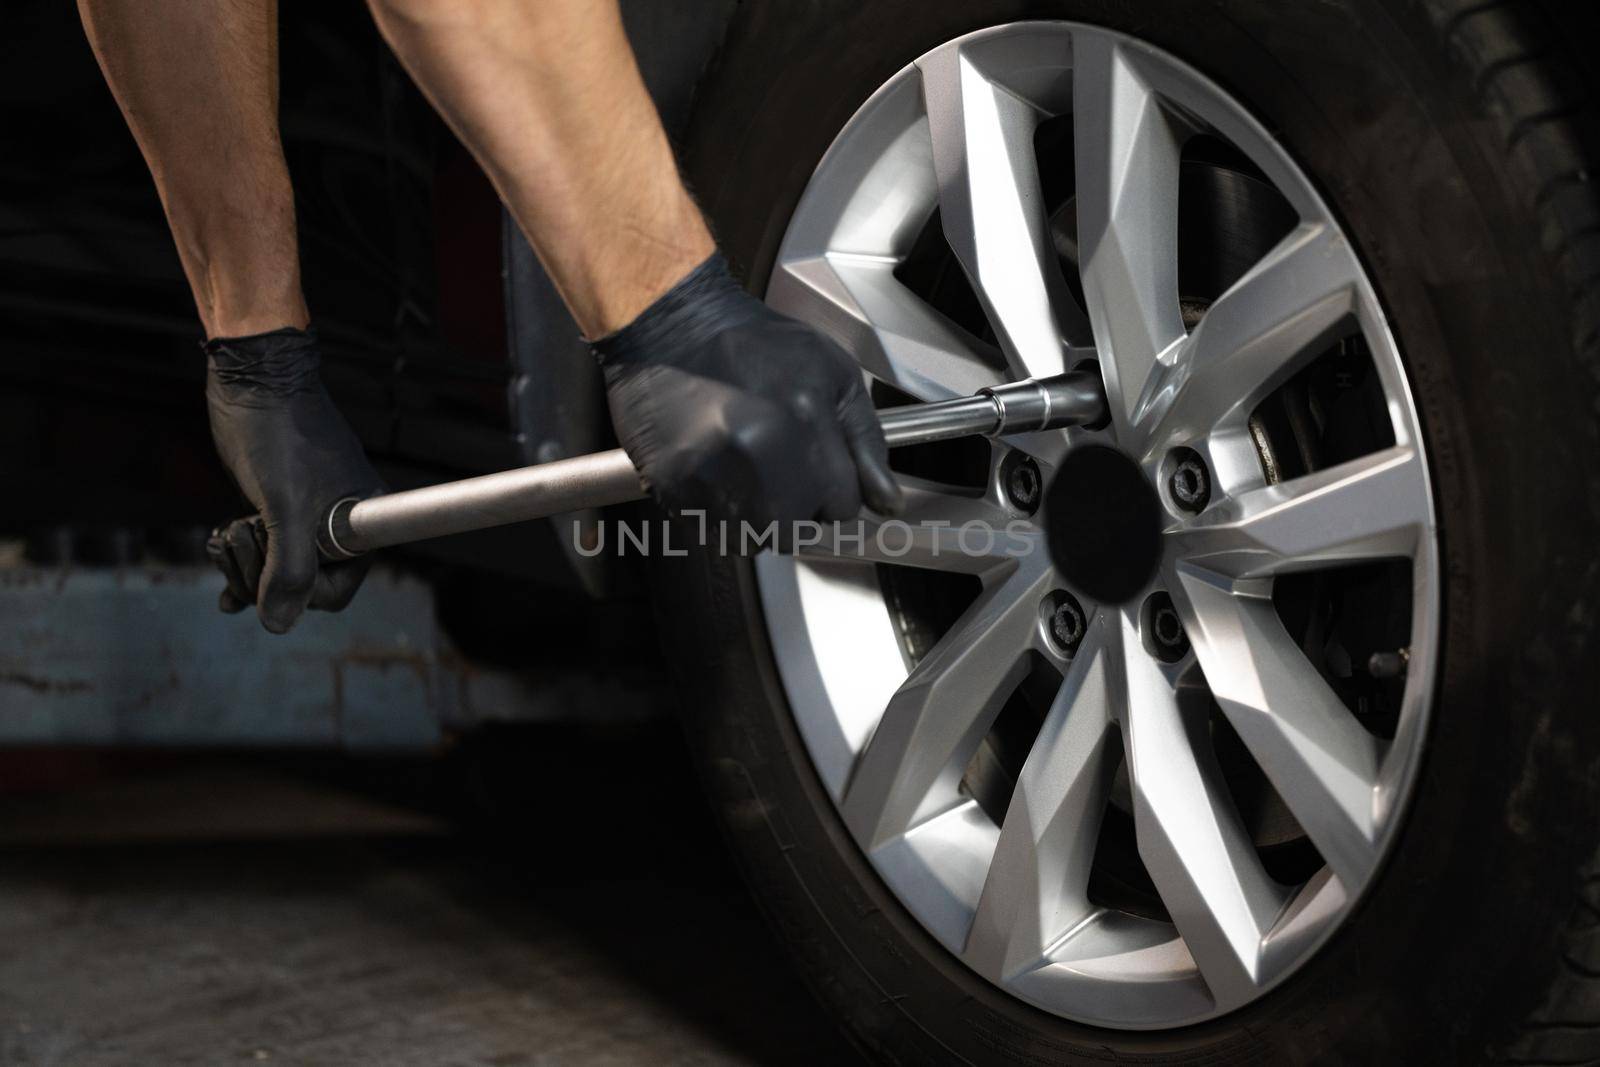 Car mechanic replacing a car wheel tire in garage workshop. Auto service. Repairman mounting wheel tire at service station.